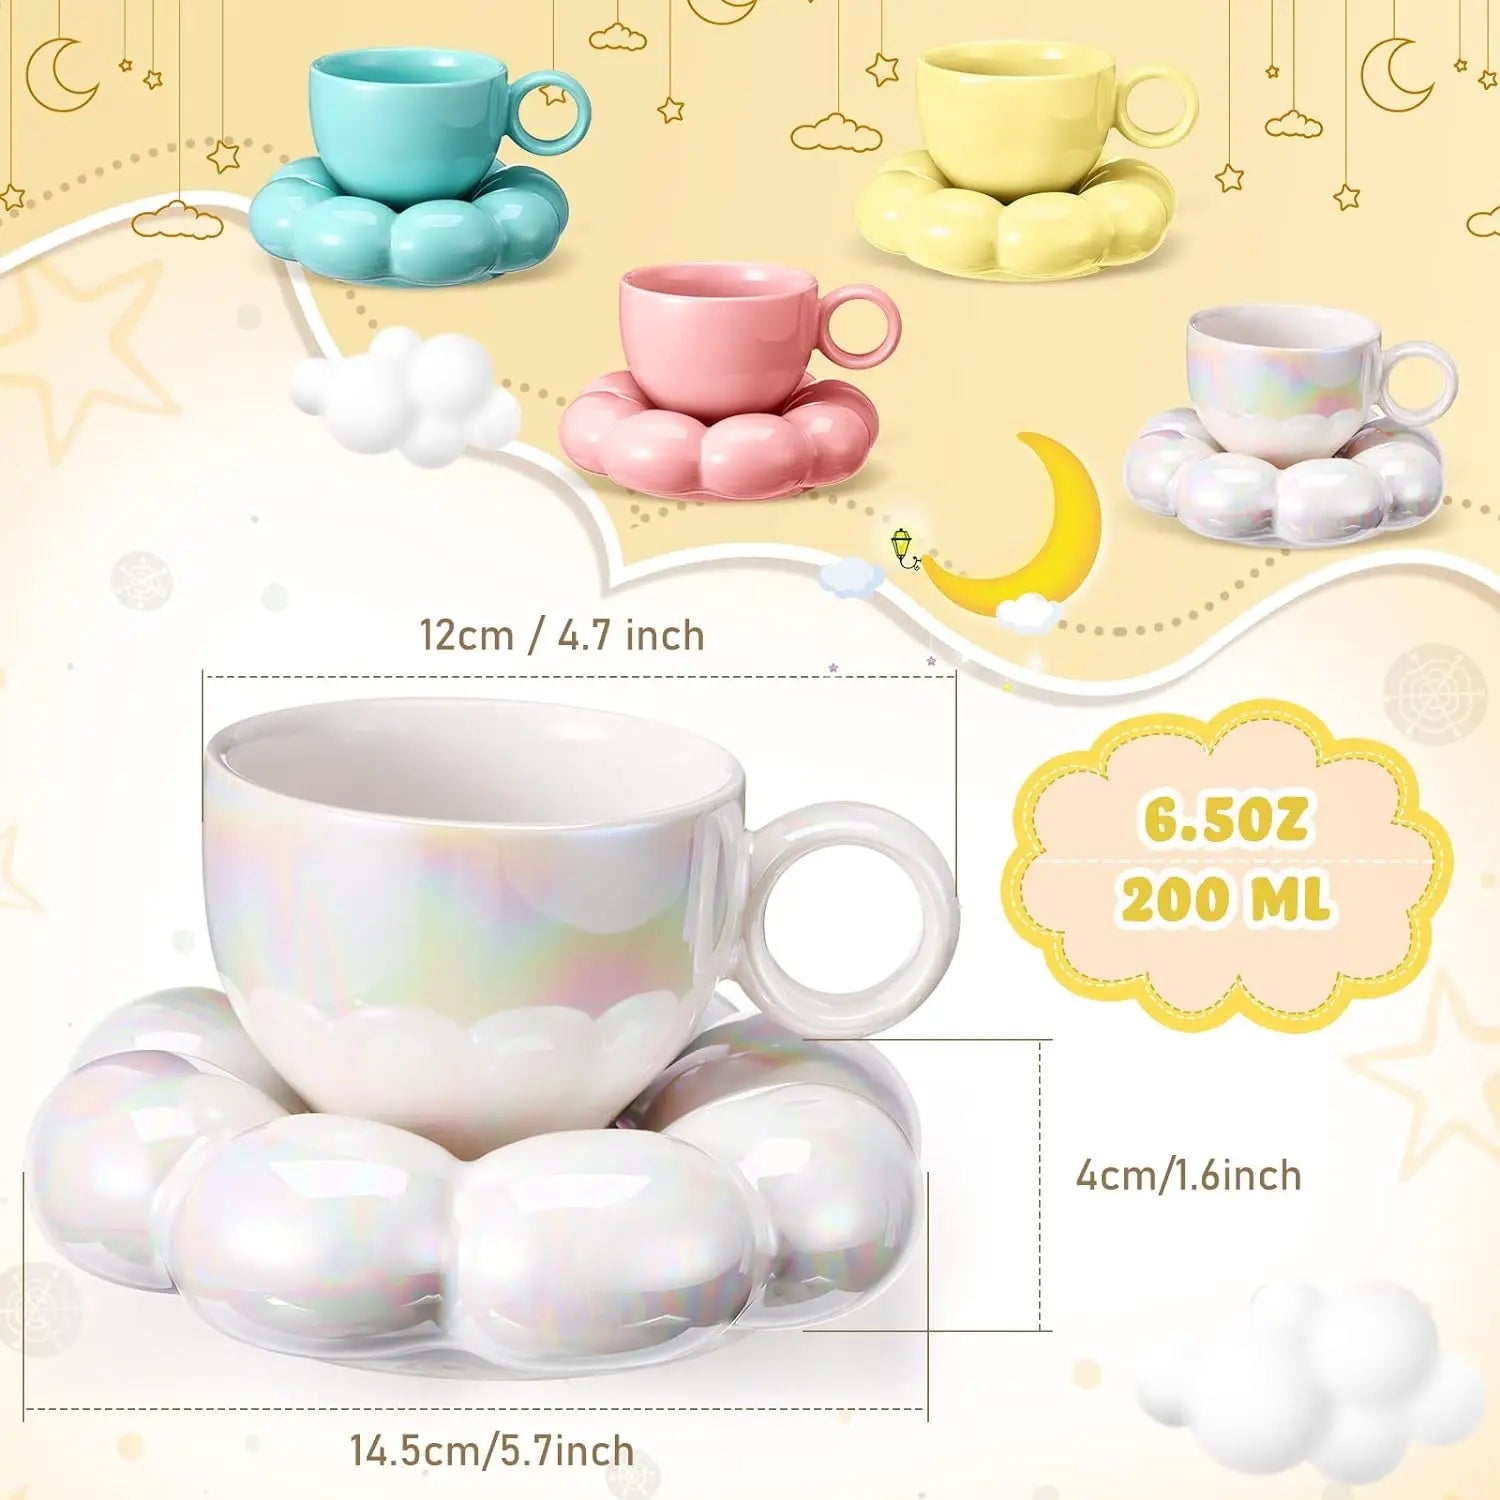 Charming Cloud Macaroon Series: Ceramic Coffee Mug Set with Saucers - Perfect for Home & Office in Pink Pearl & White